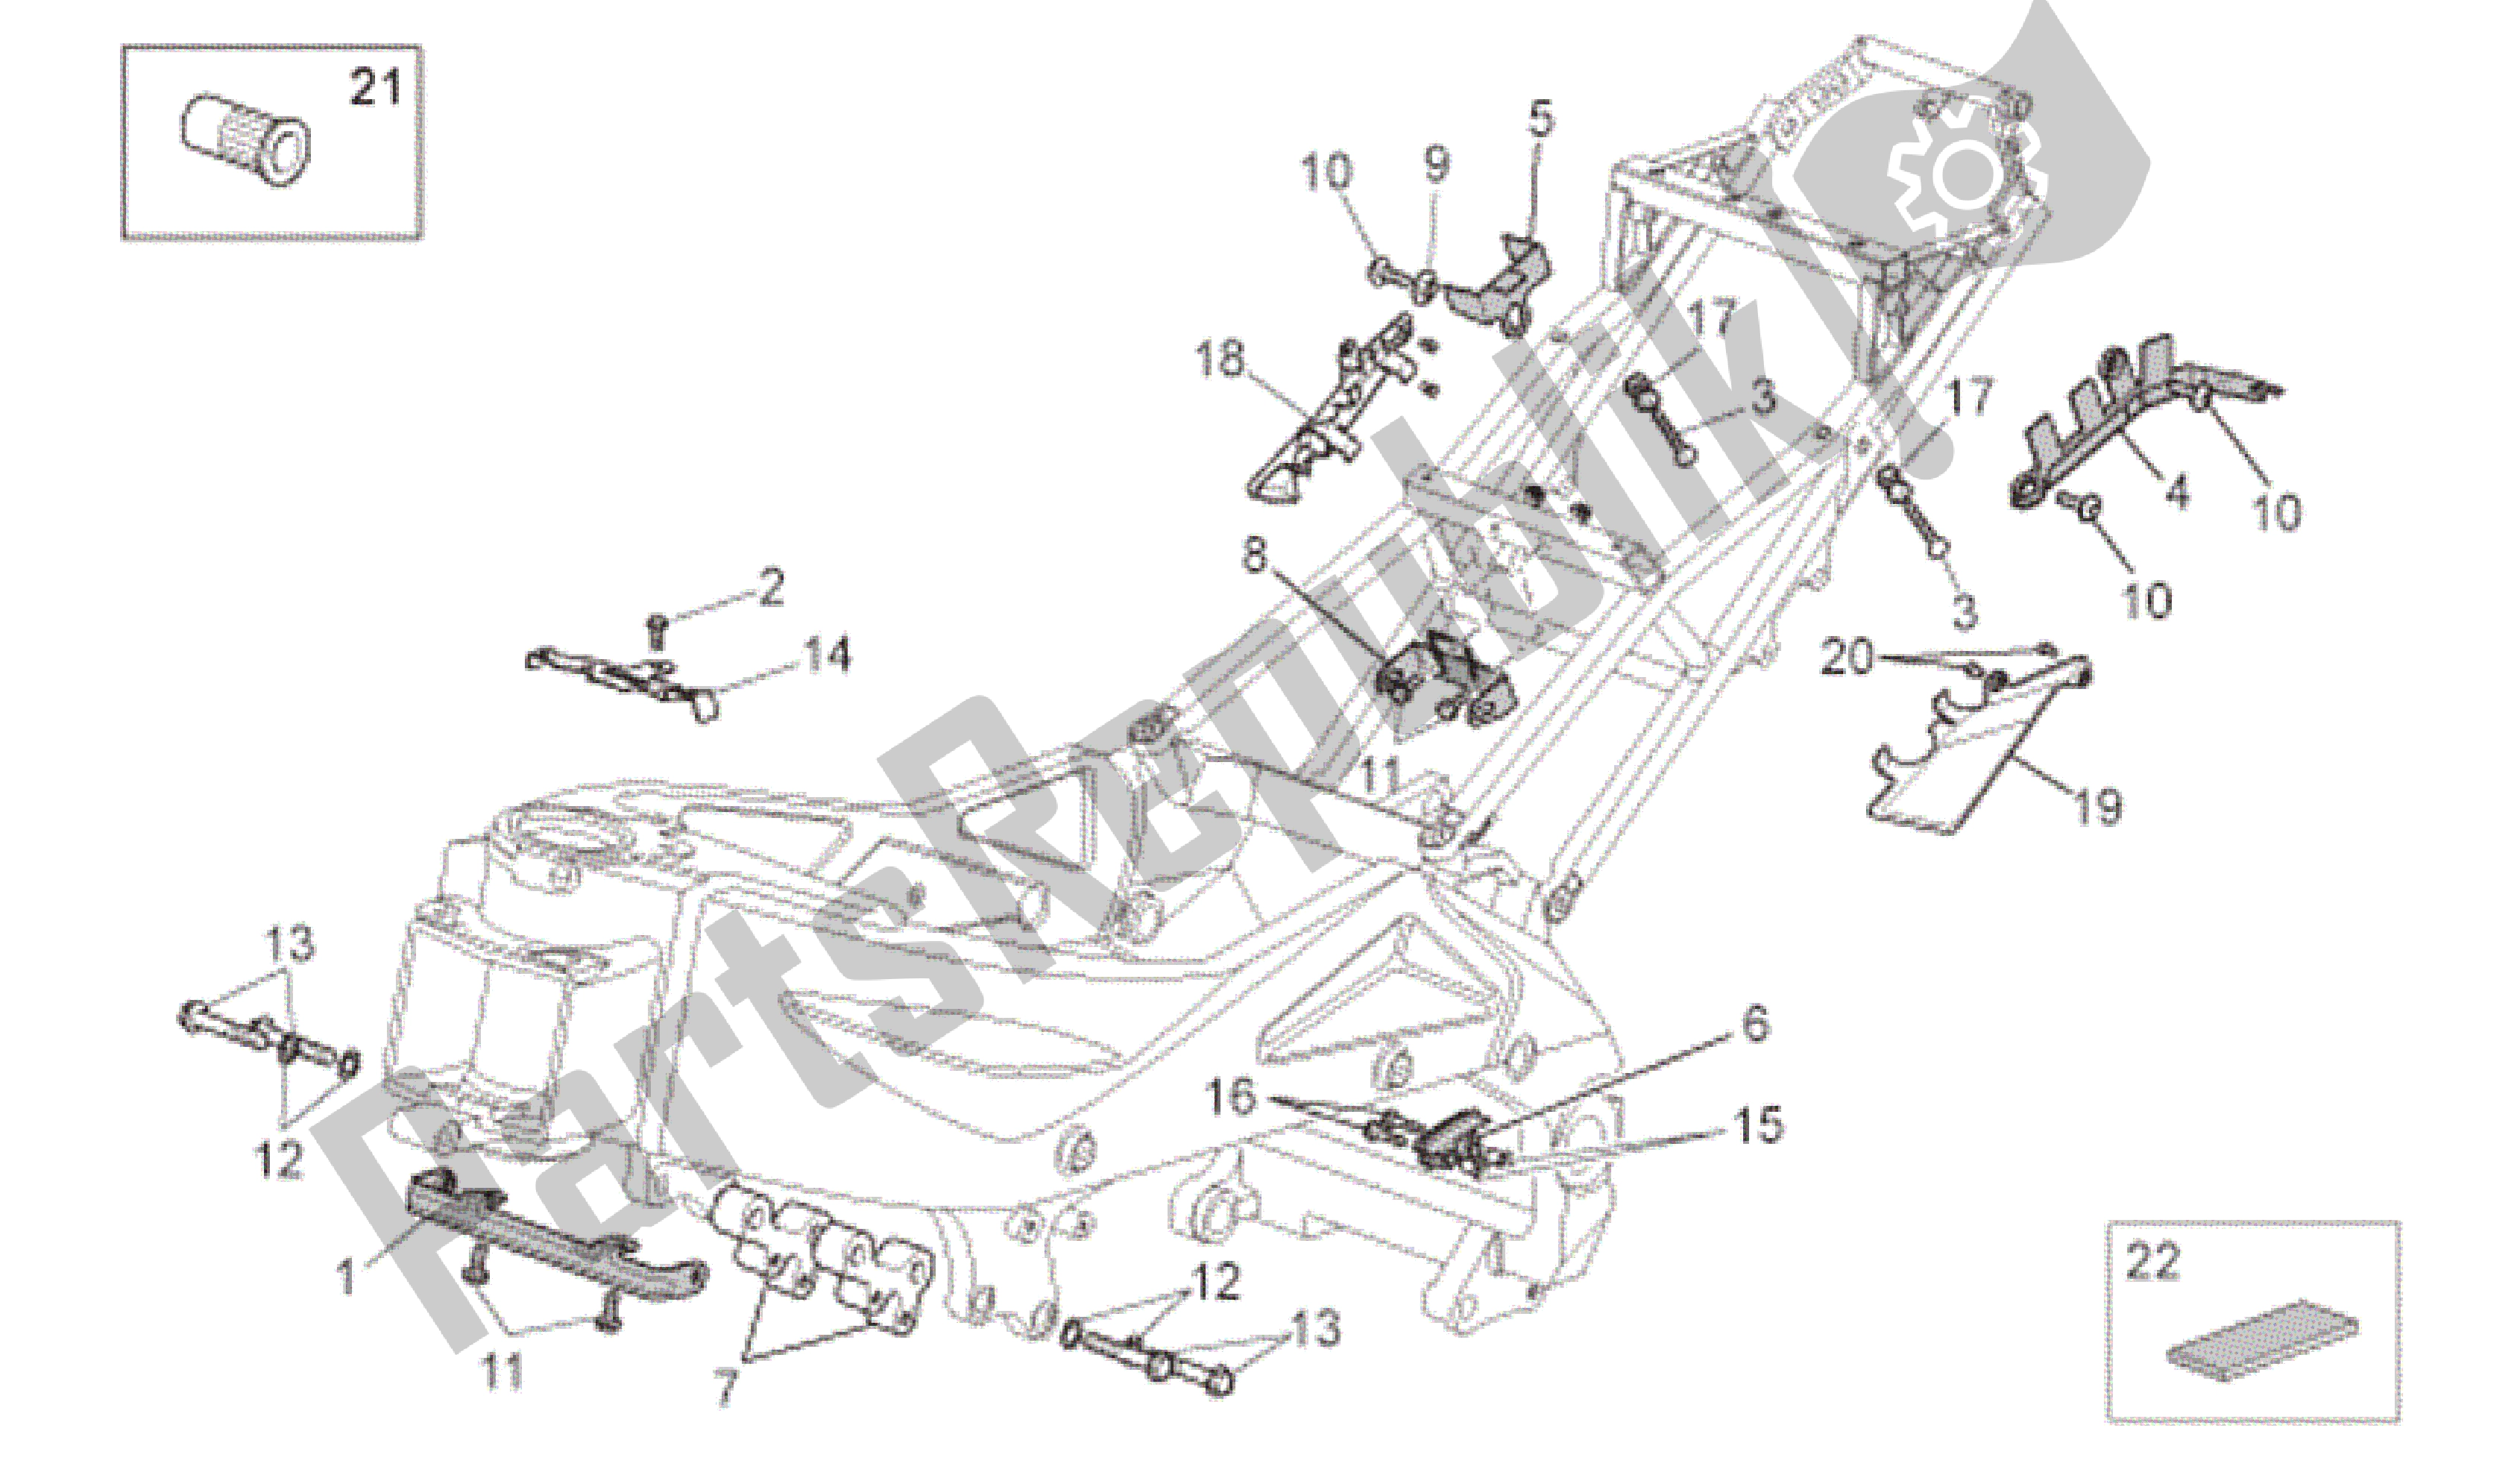 All parts for the Frame Ii of the Aprilia RSV Tuono Factory 3985 1000 2006 - 2009